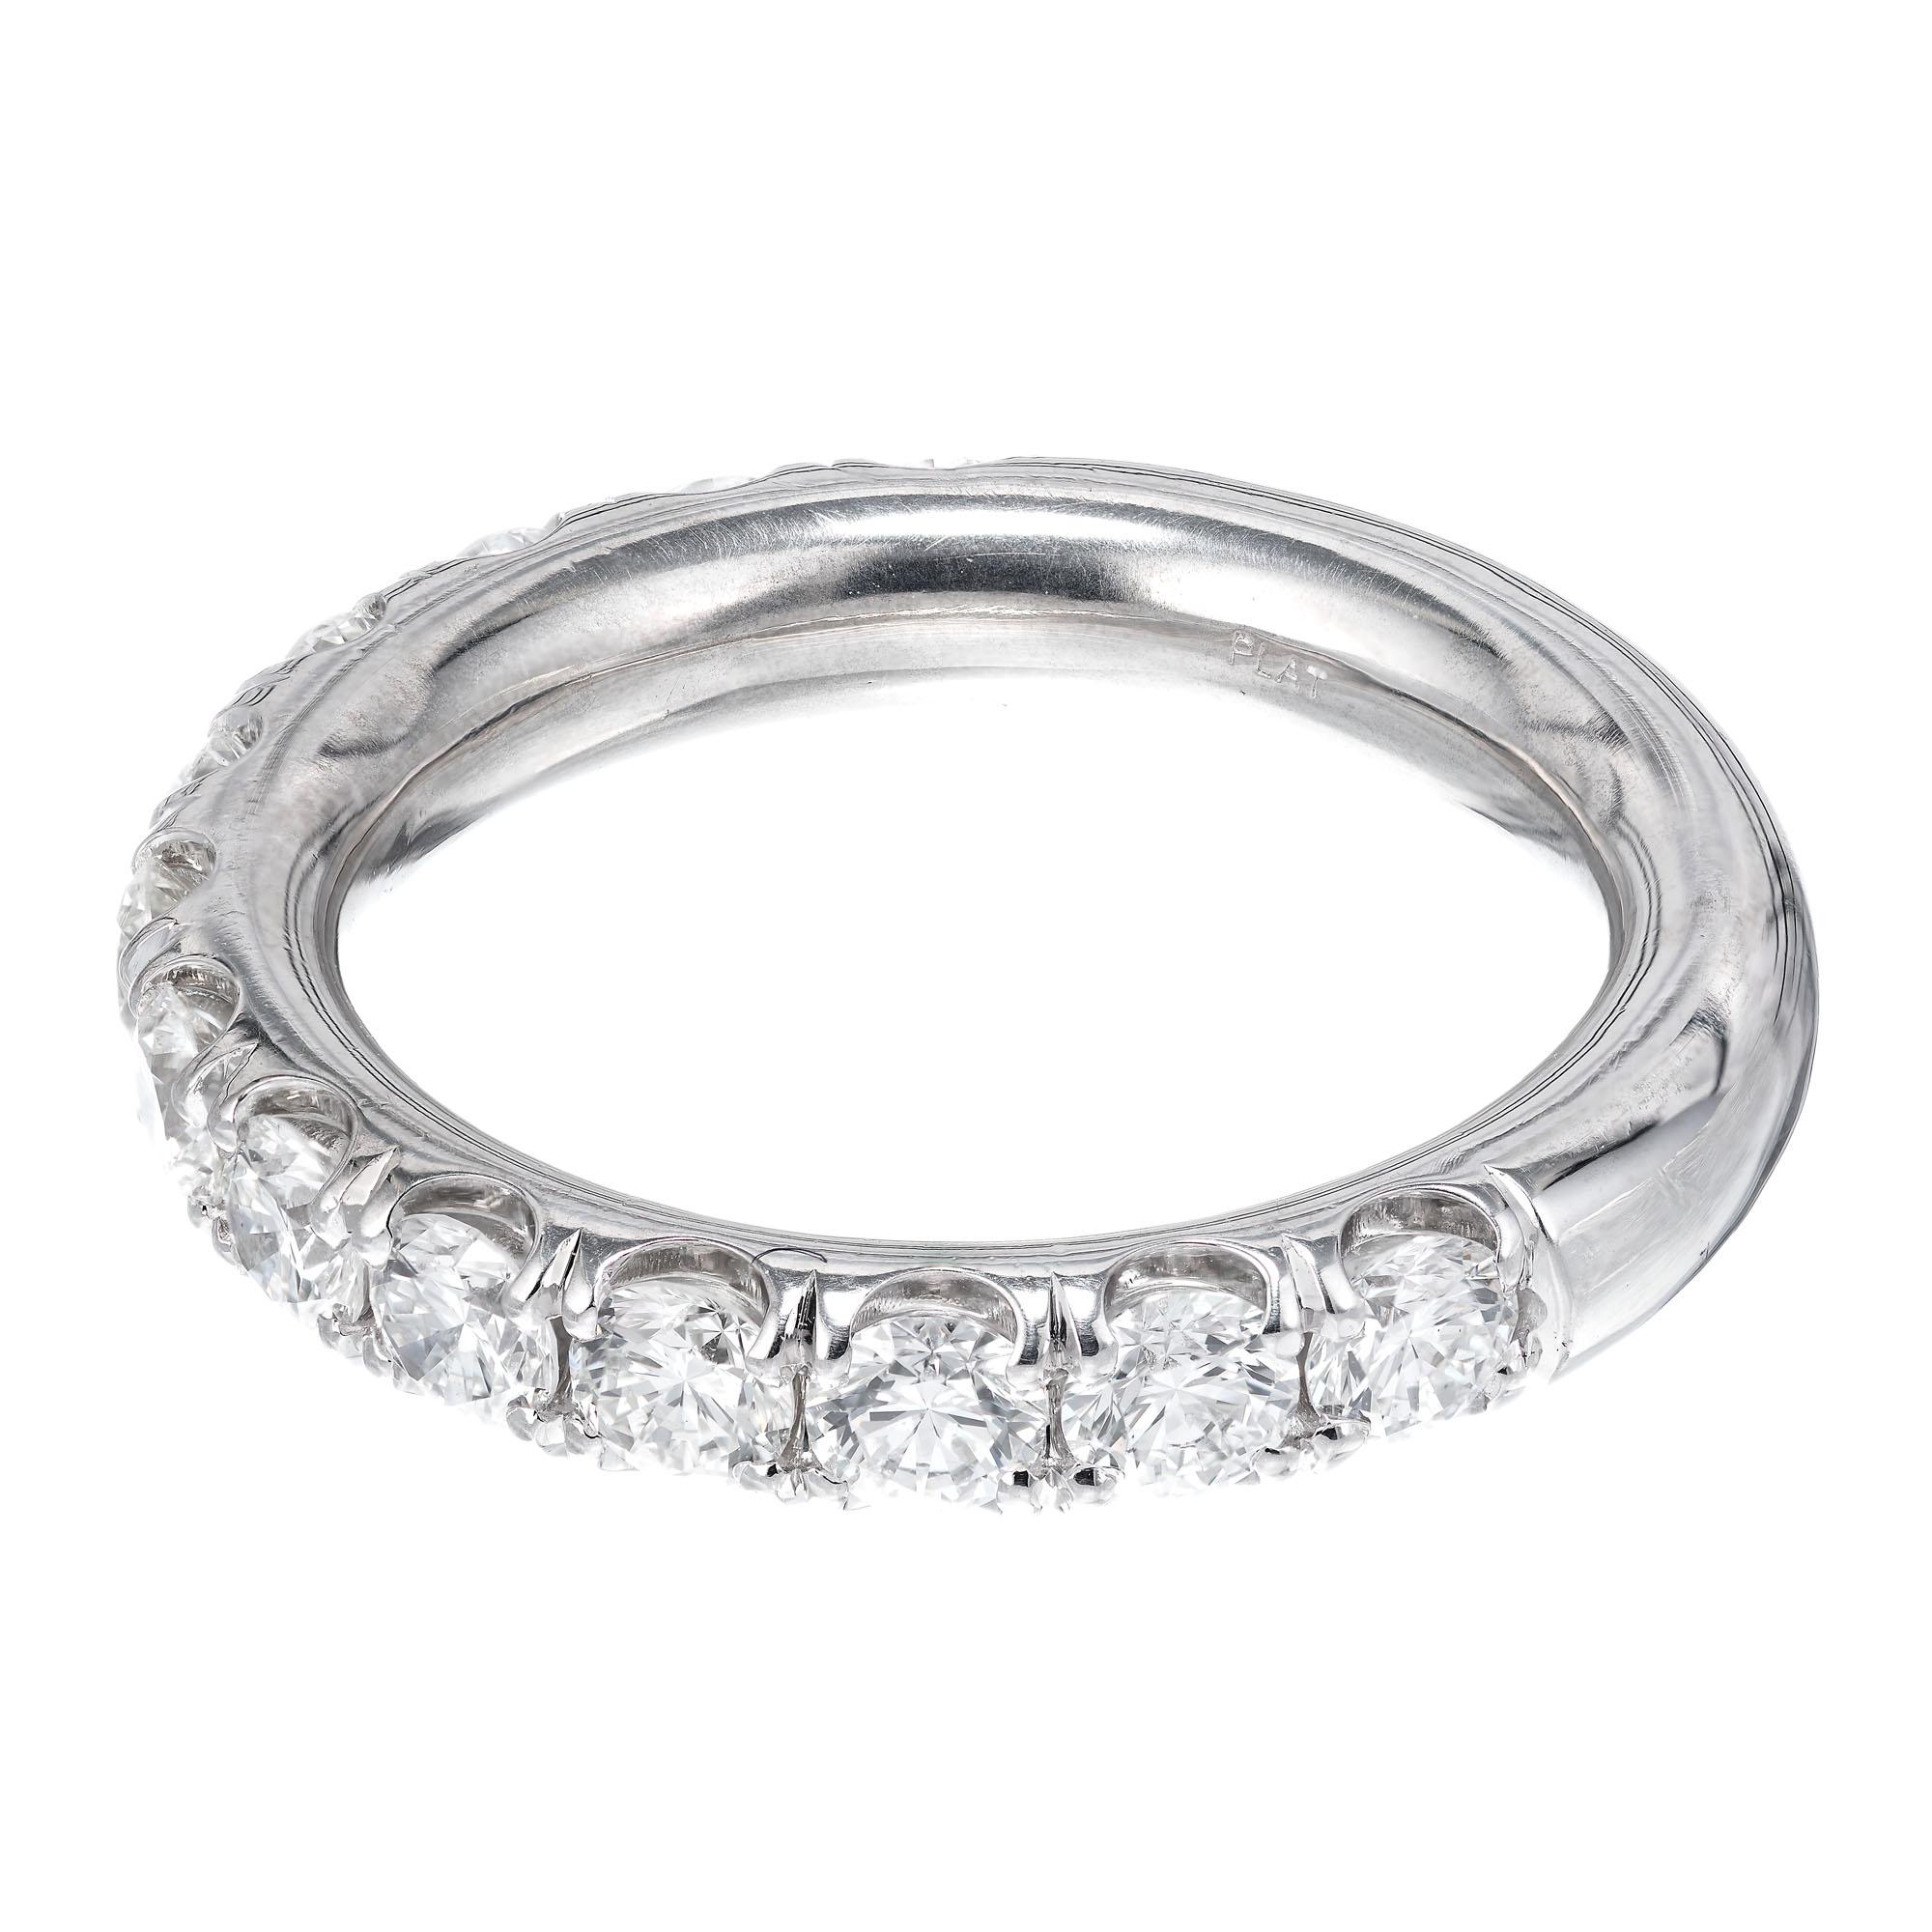 13 round cut diamond wedding band ring. Set in platinum. Created in the Peter Suchy Workshop. 

13 round diamonds E-F, VVS2/VS approx. 1.50cts
Platinum
Size 6 and sizable
9.70 grams